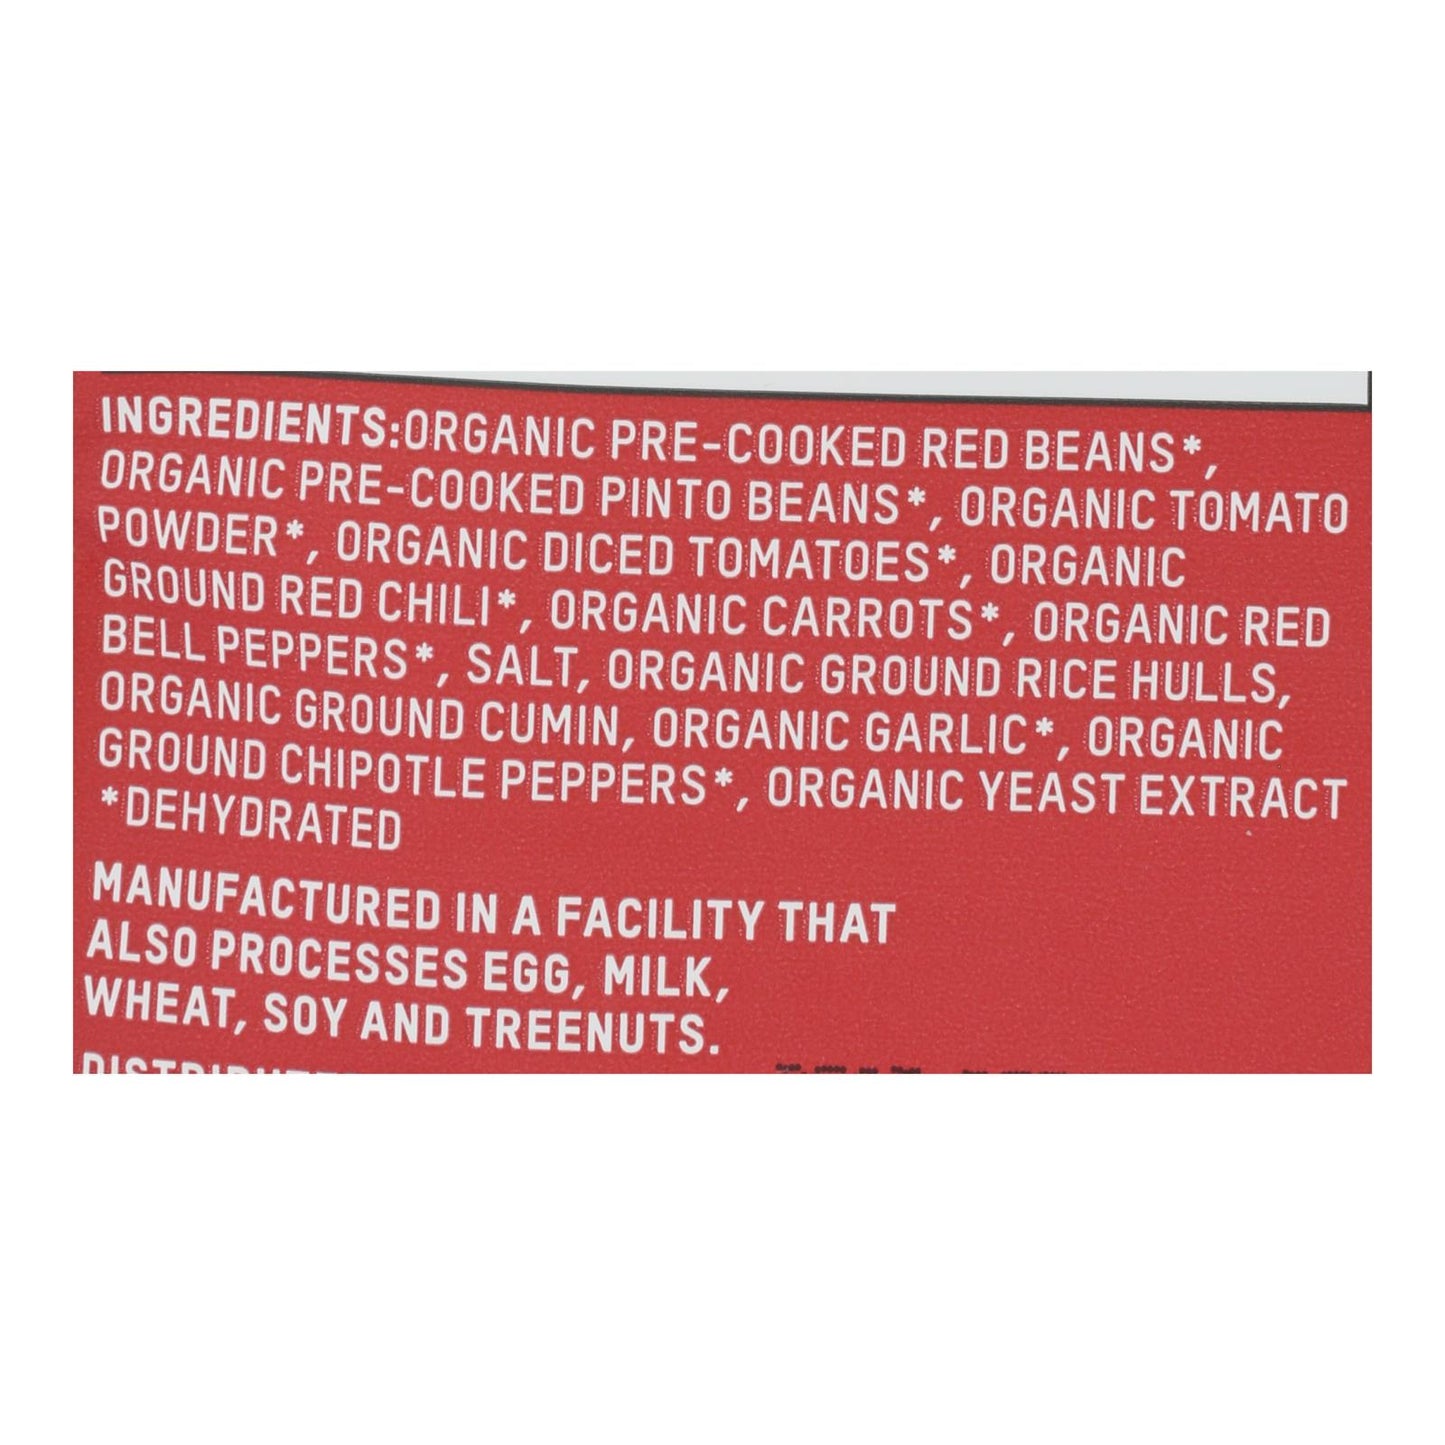 Patagonia - Mix Soup Red Bn Chili - Case Of 6 - 6.1 Oz